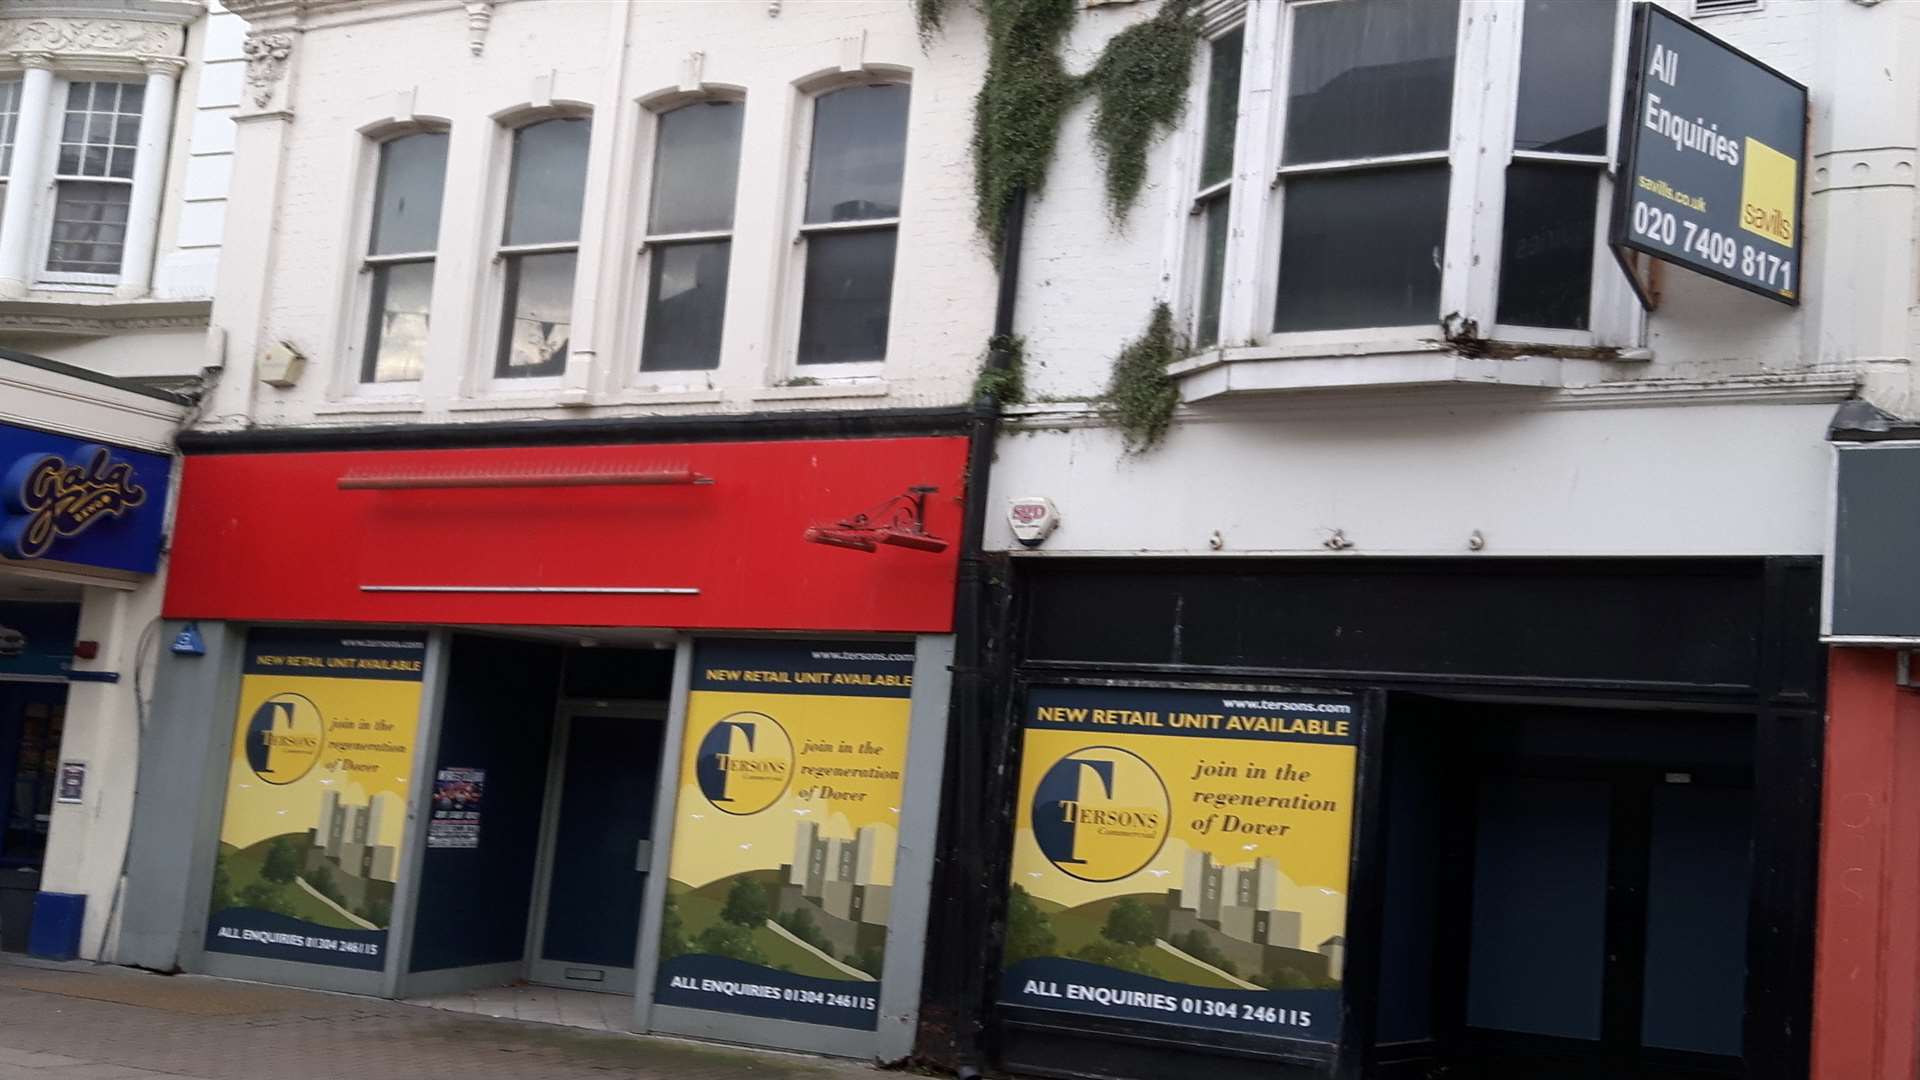 The disused building in Biggin Street, Dover, now to be refurbished